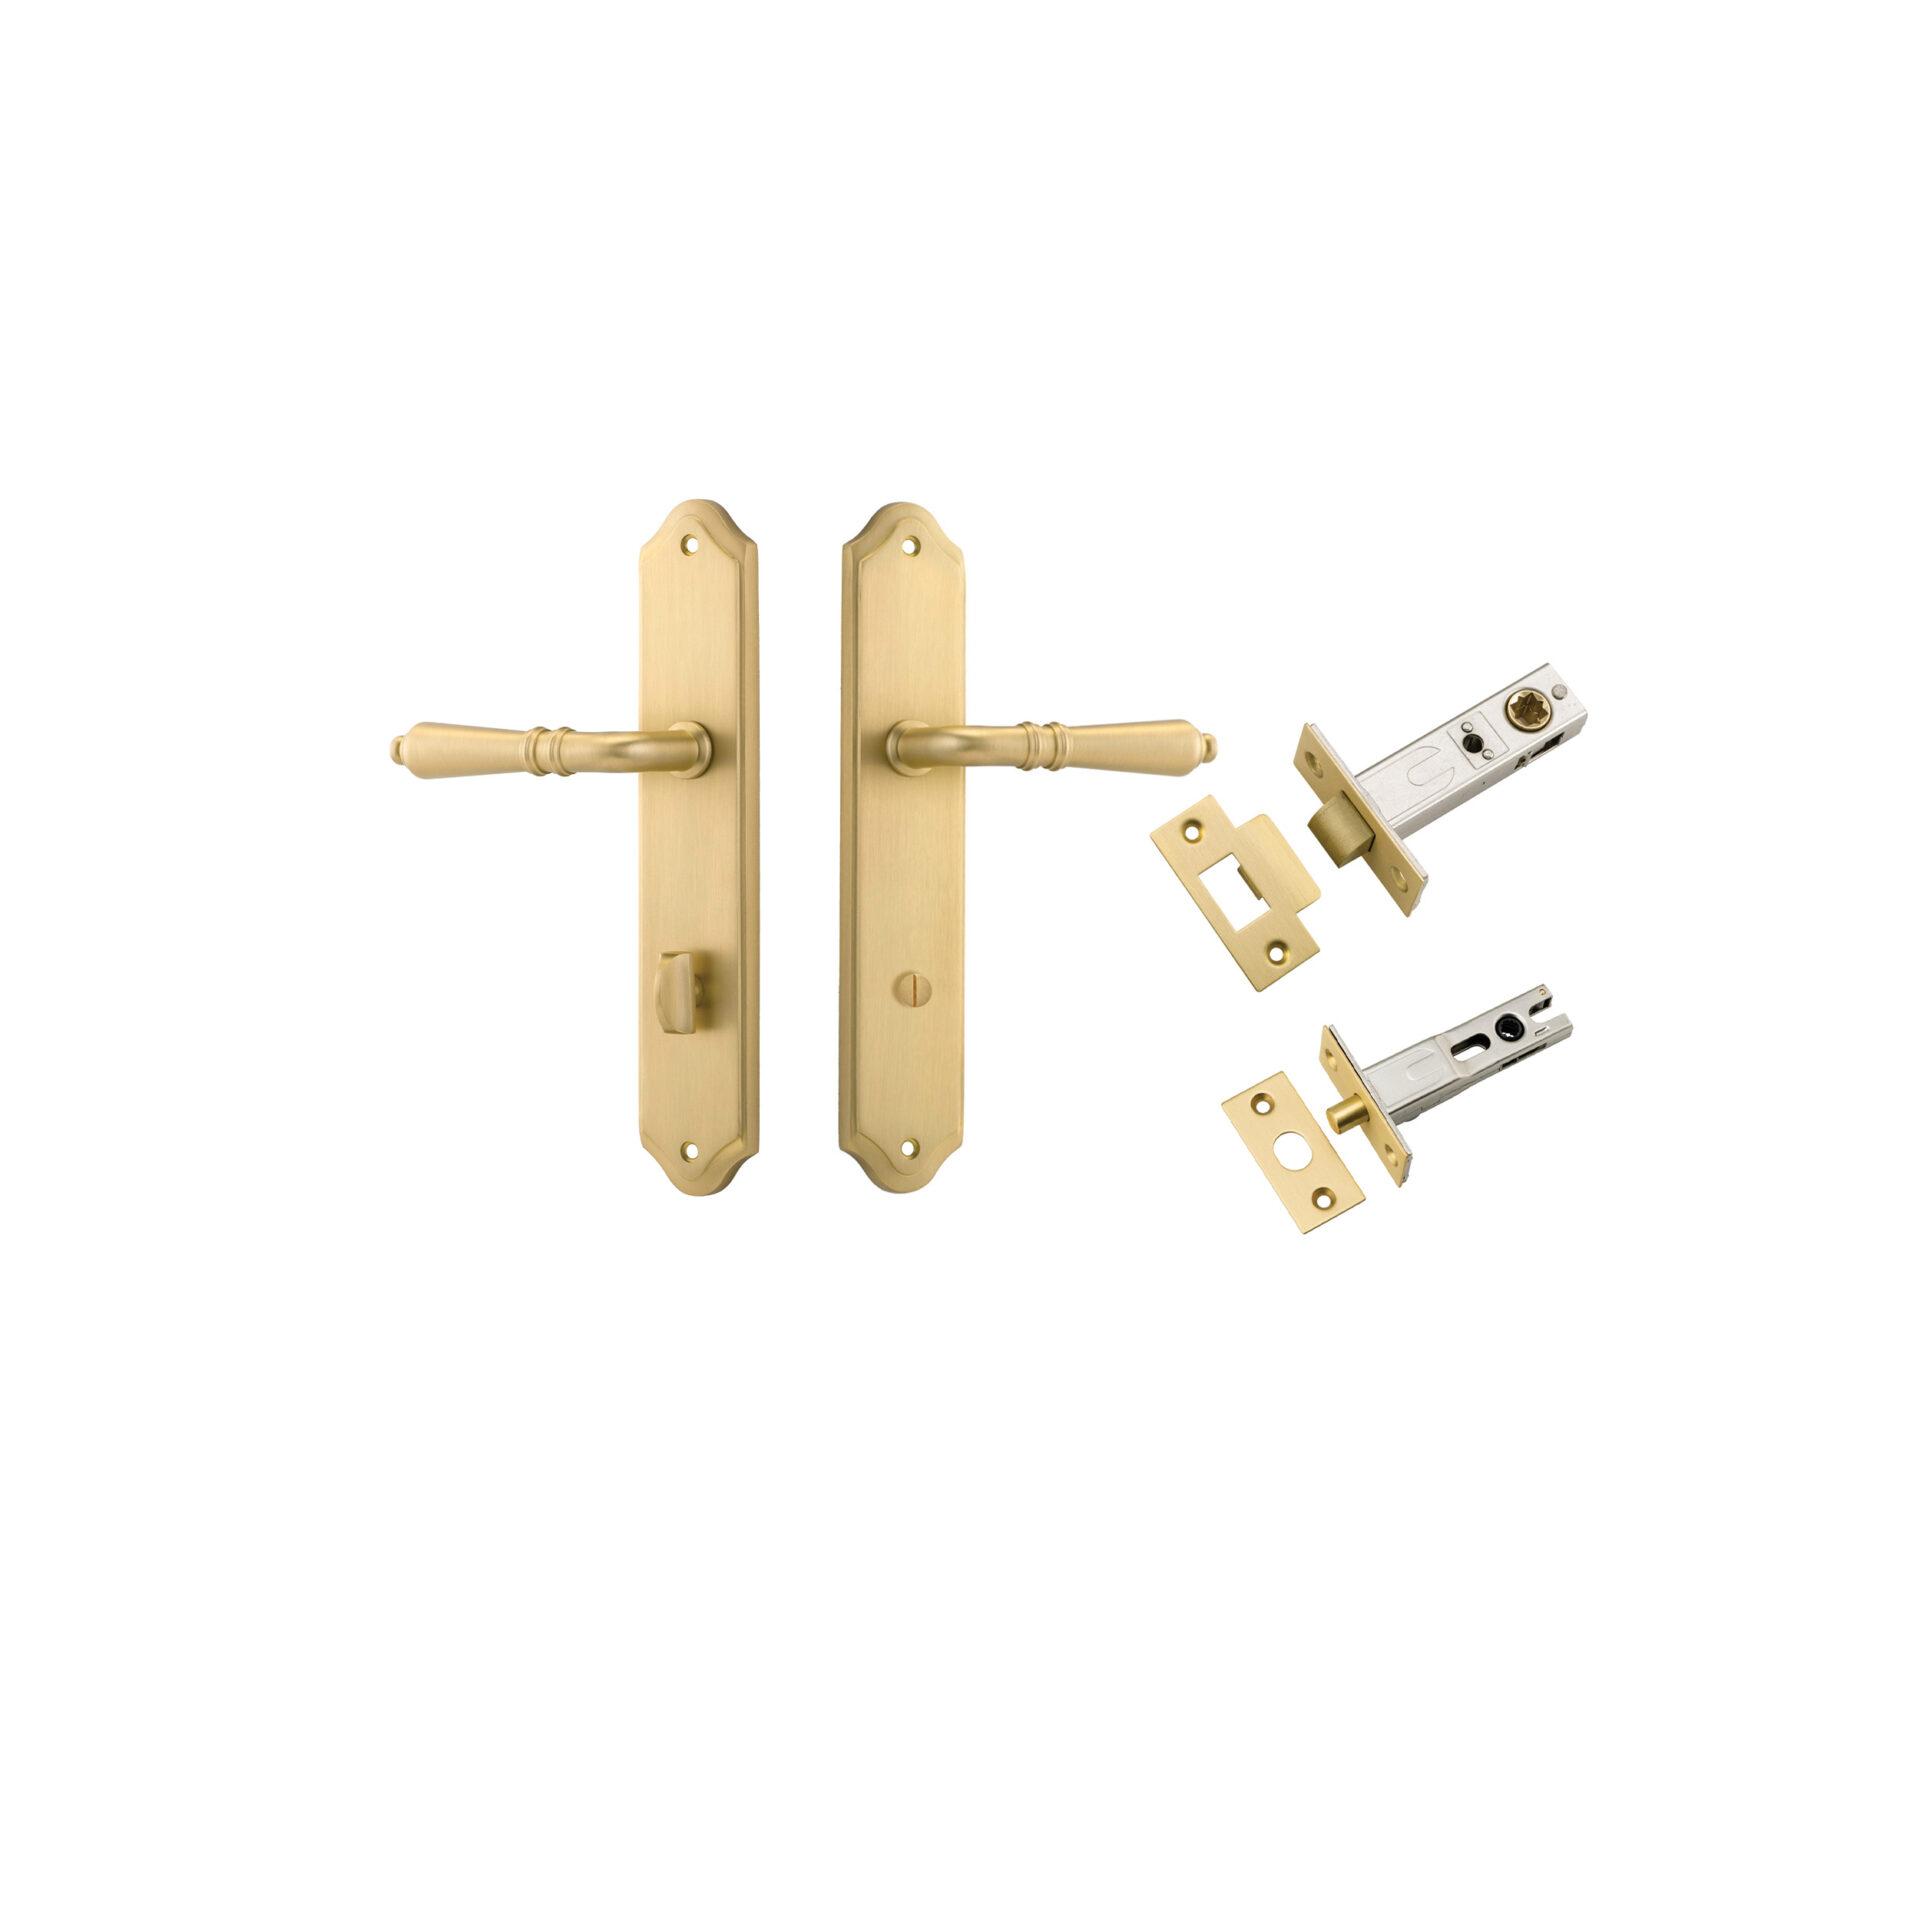 16212KPRIV60 - Sarlat Lever - Shouldered Backplate Privacy Kit with Privacy Turn - Brushed Gold PVD - Privacy